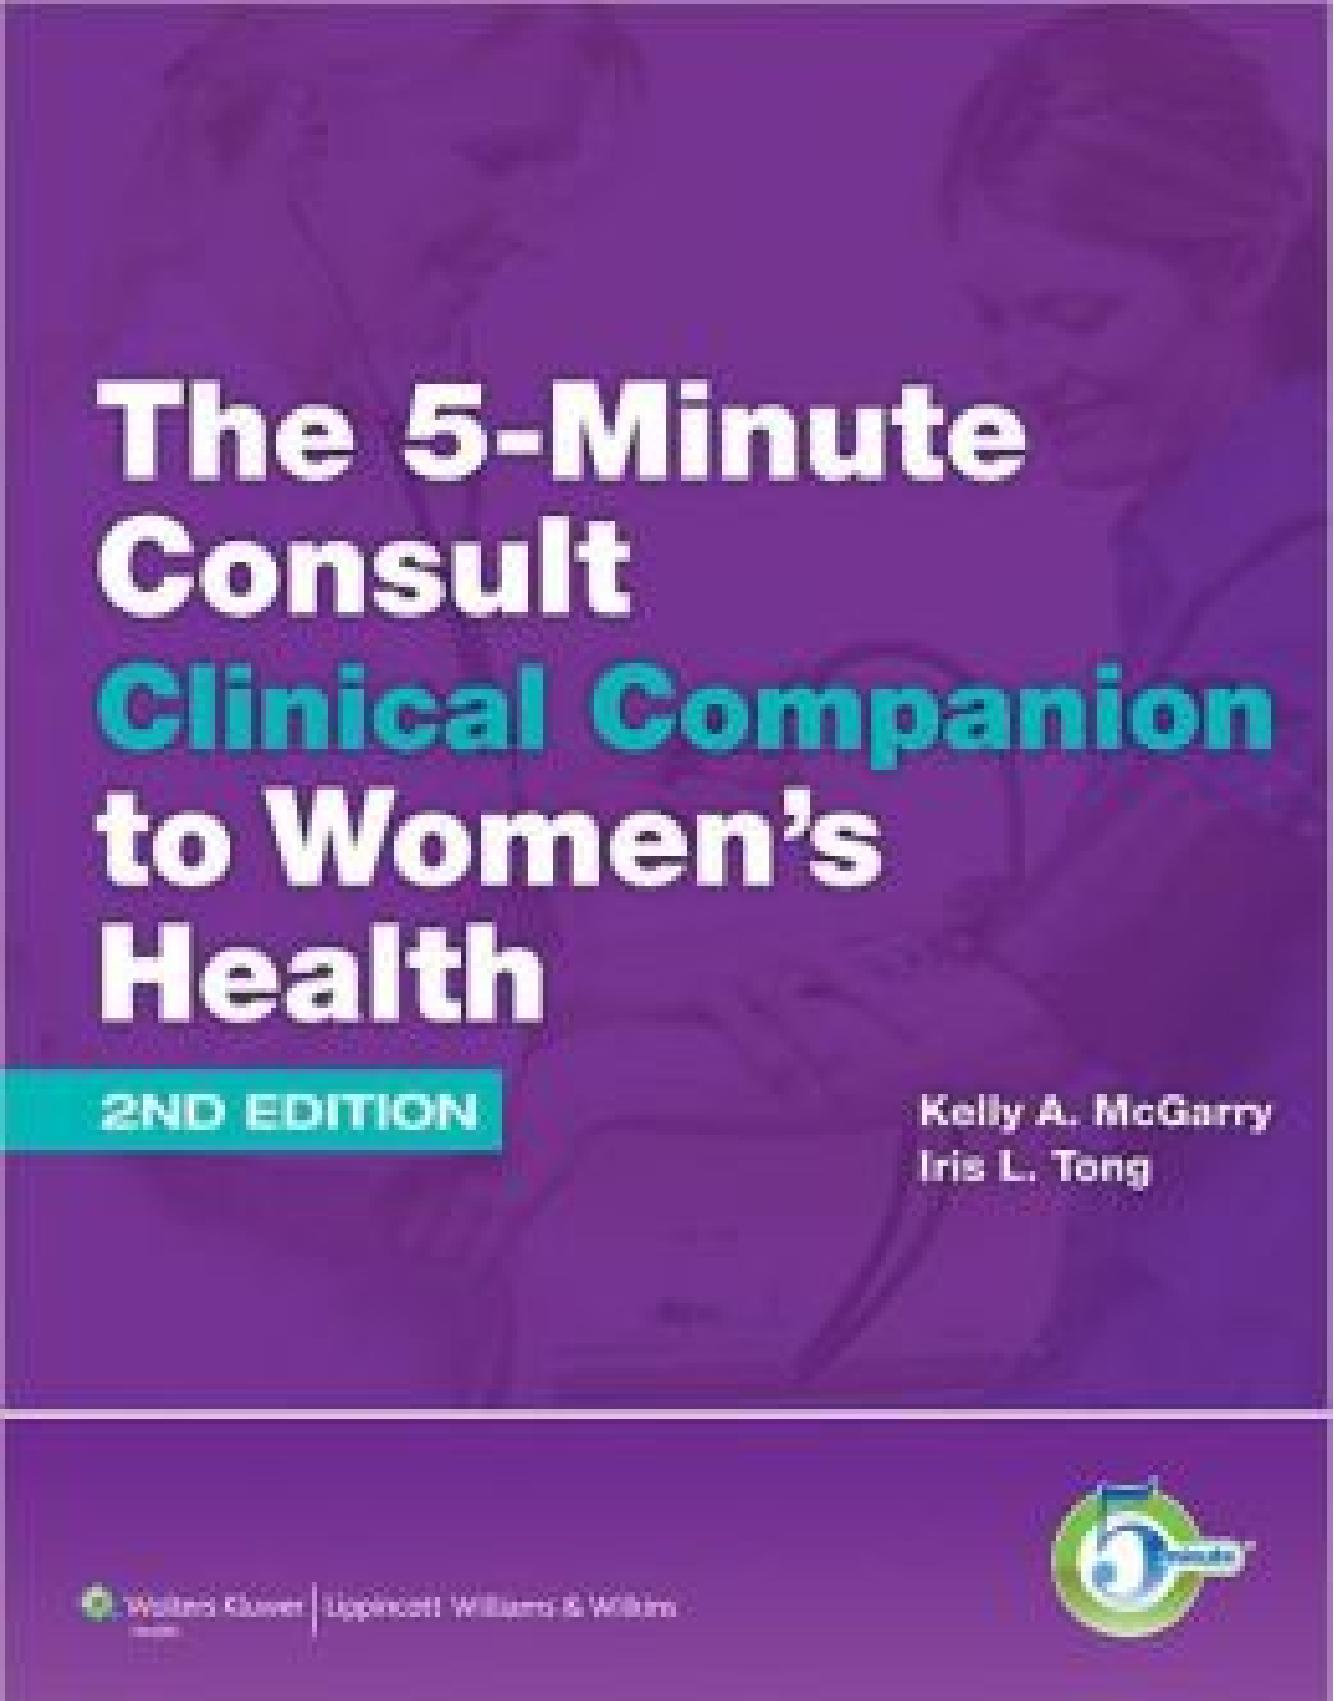 5-Minute Consult Clinical Companion to Women s Health by Kelly A. McGarry MD 